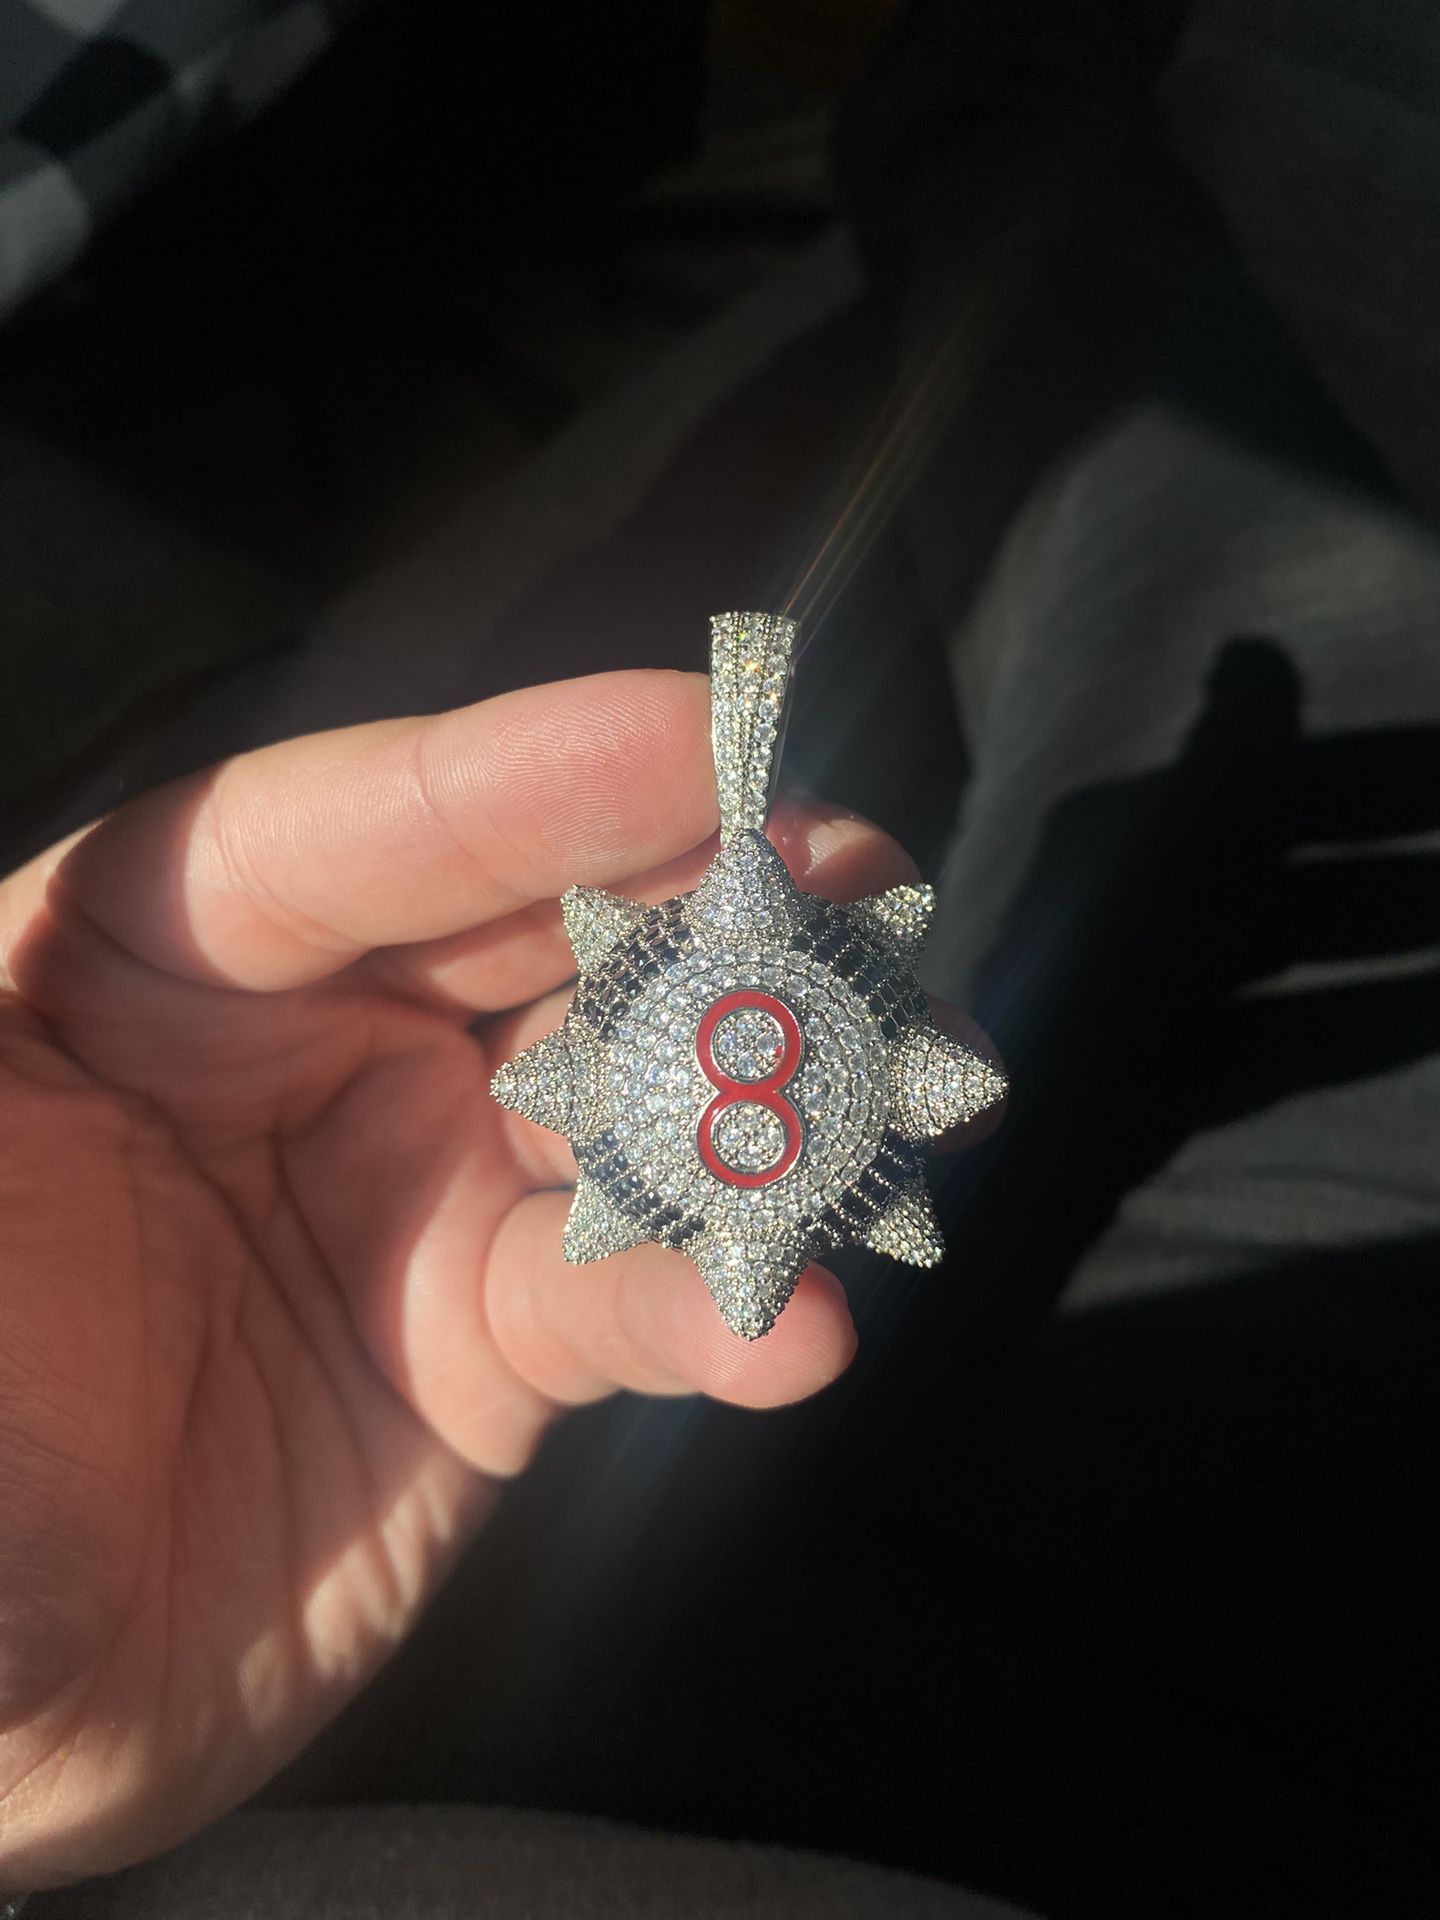 Spiked 8 Ball Pendant For Necklace